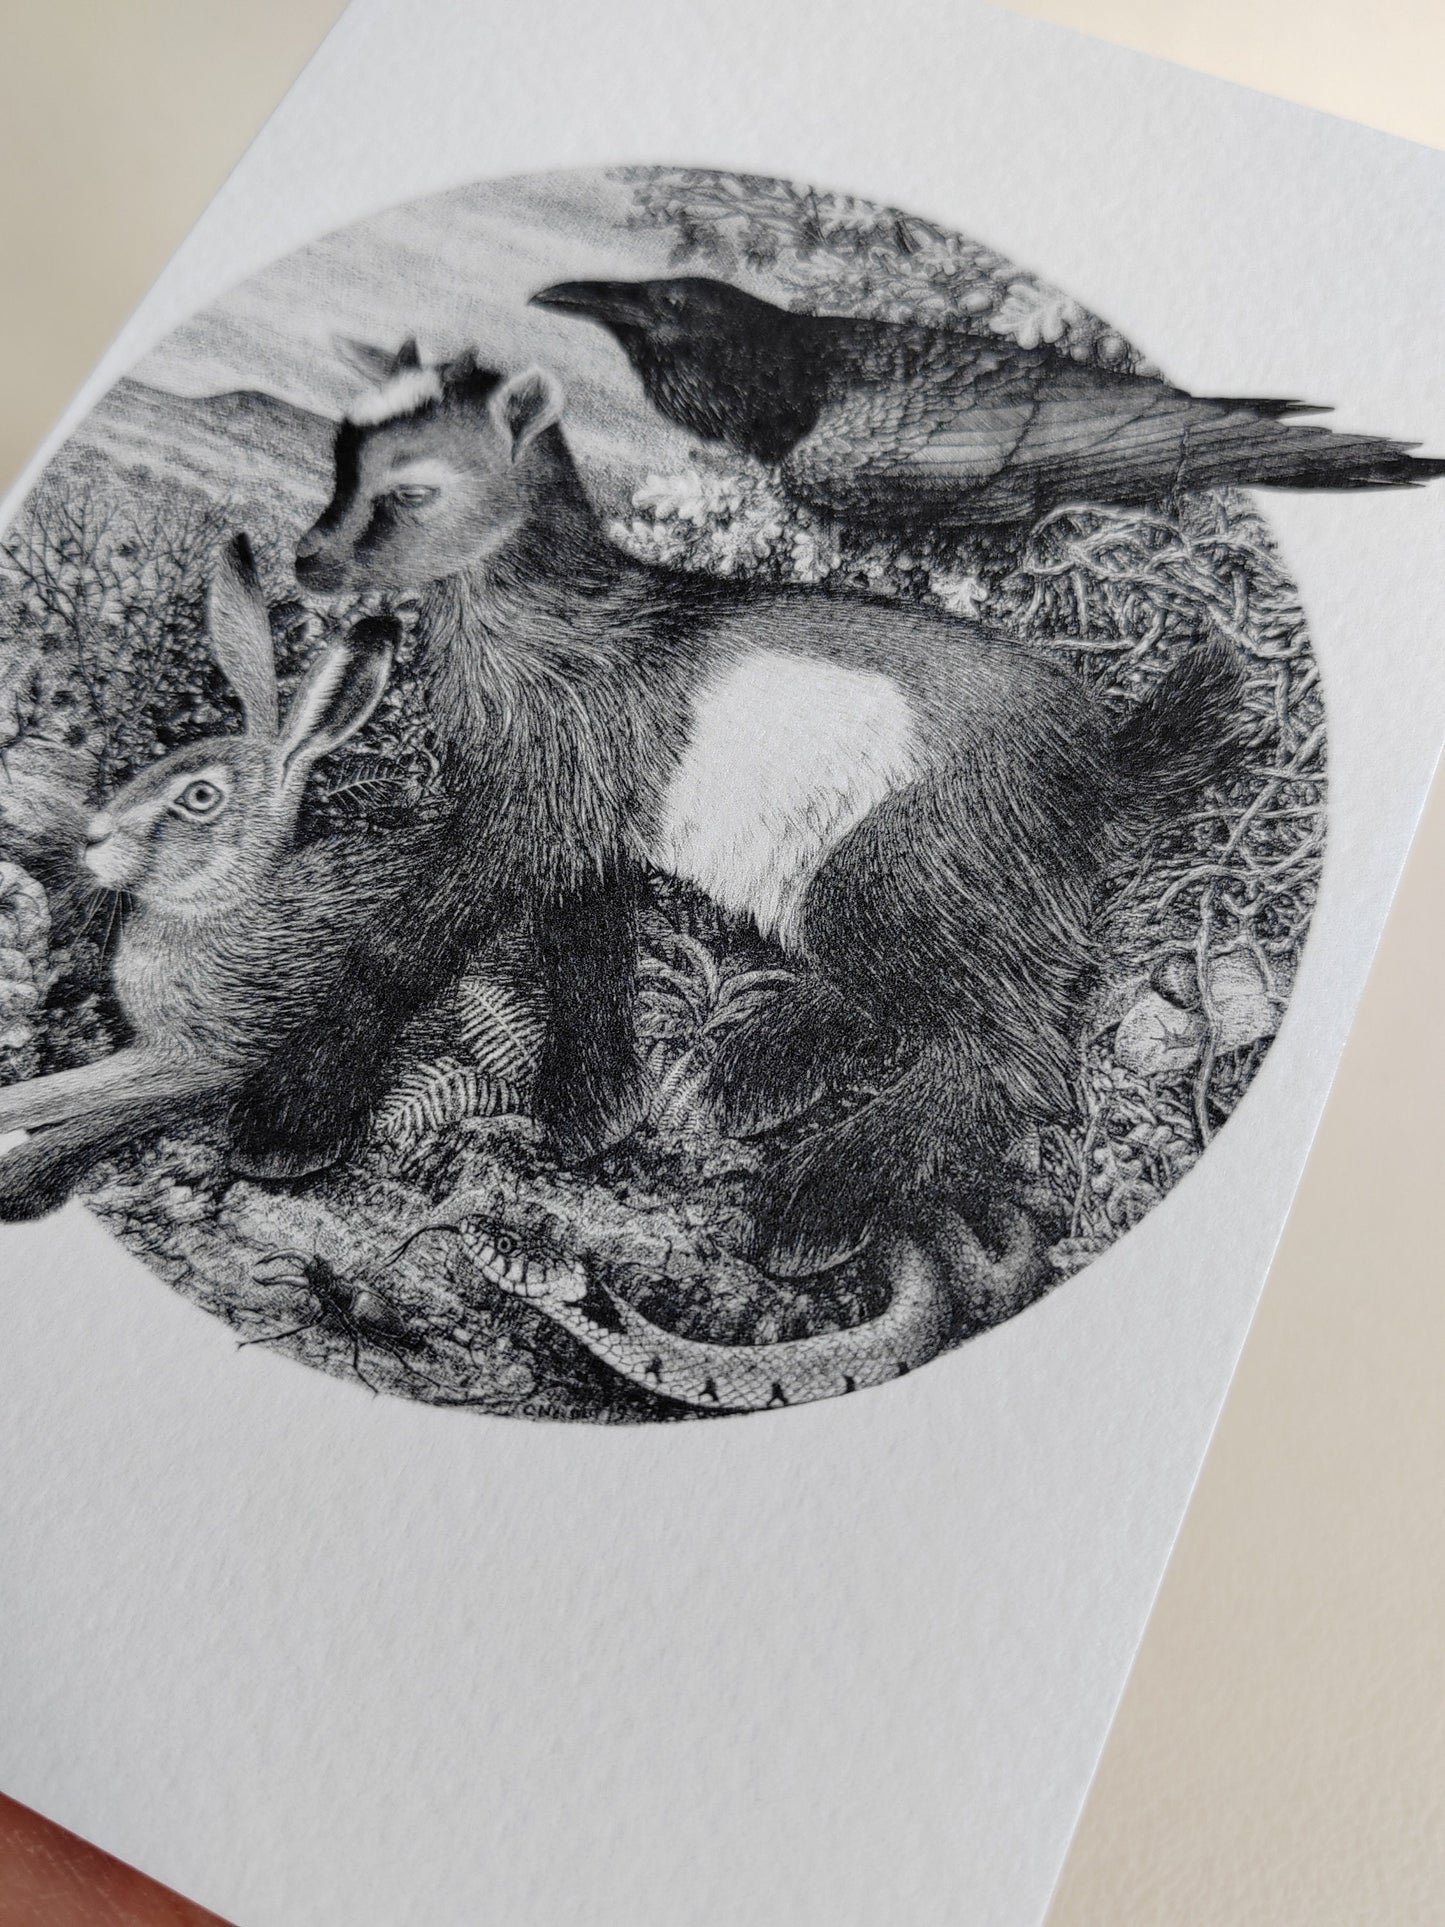 The Magic Returning - Hare, Goat, Raven, Snake Greetings Card, A6 size